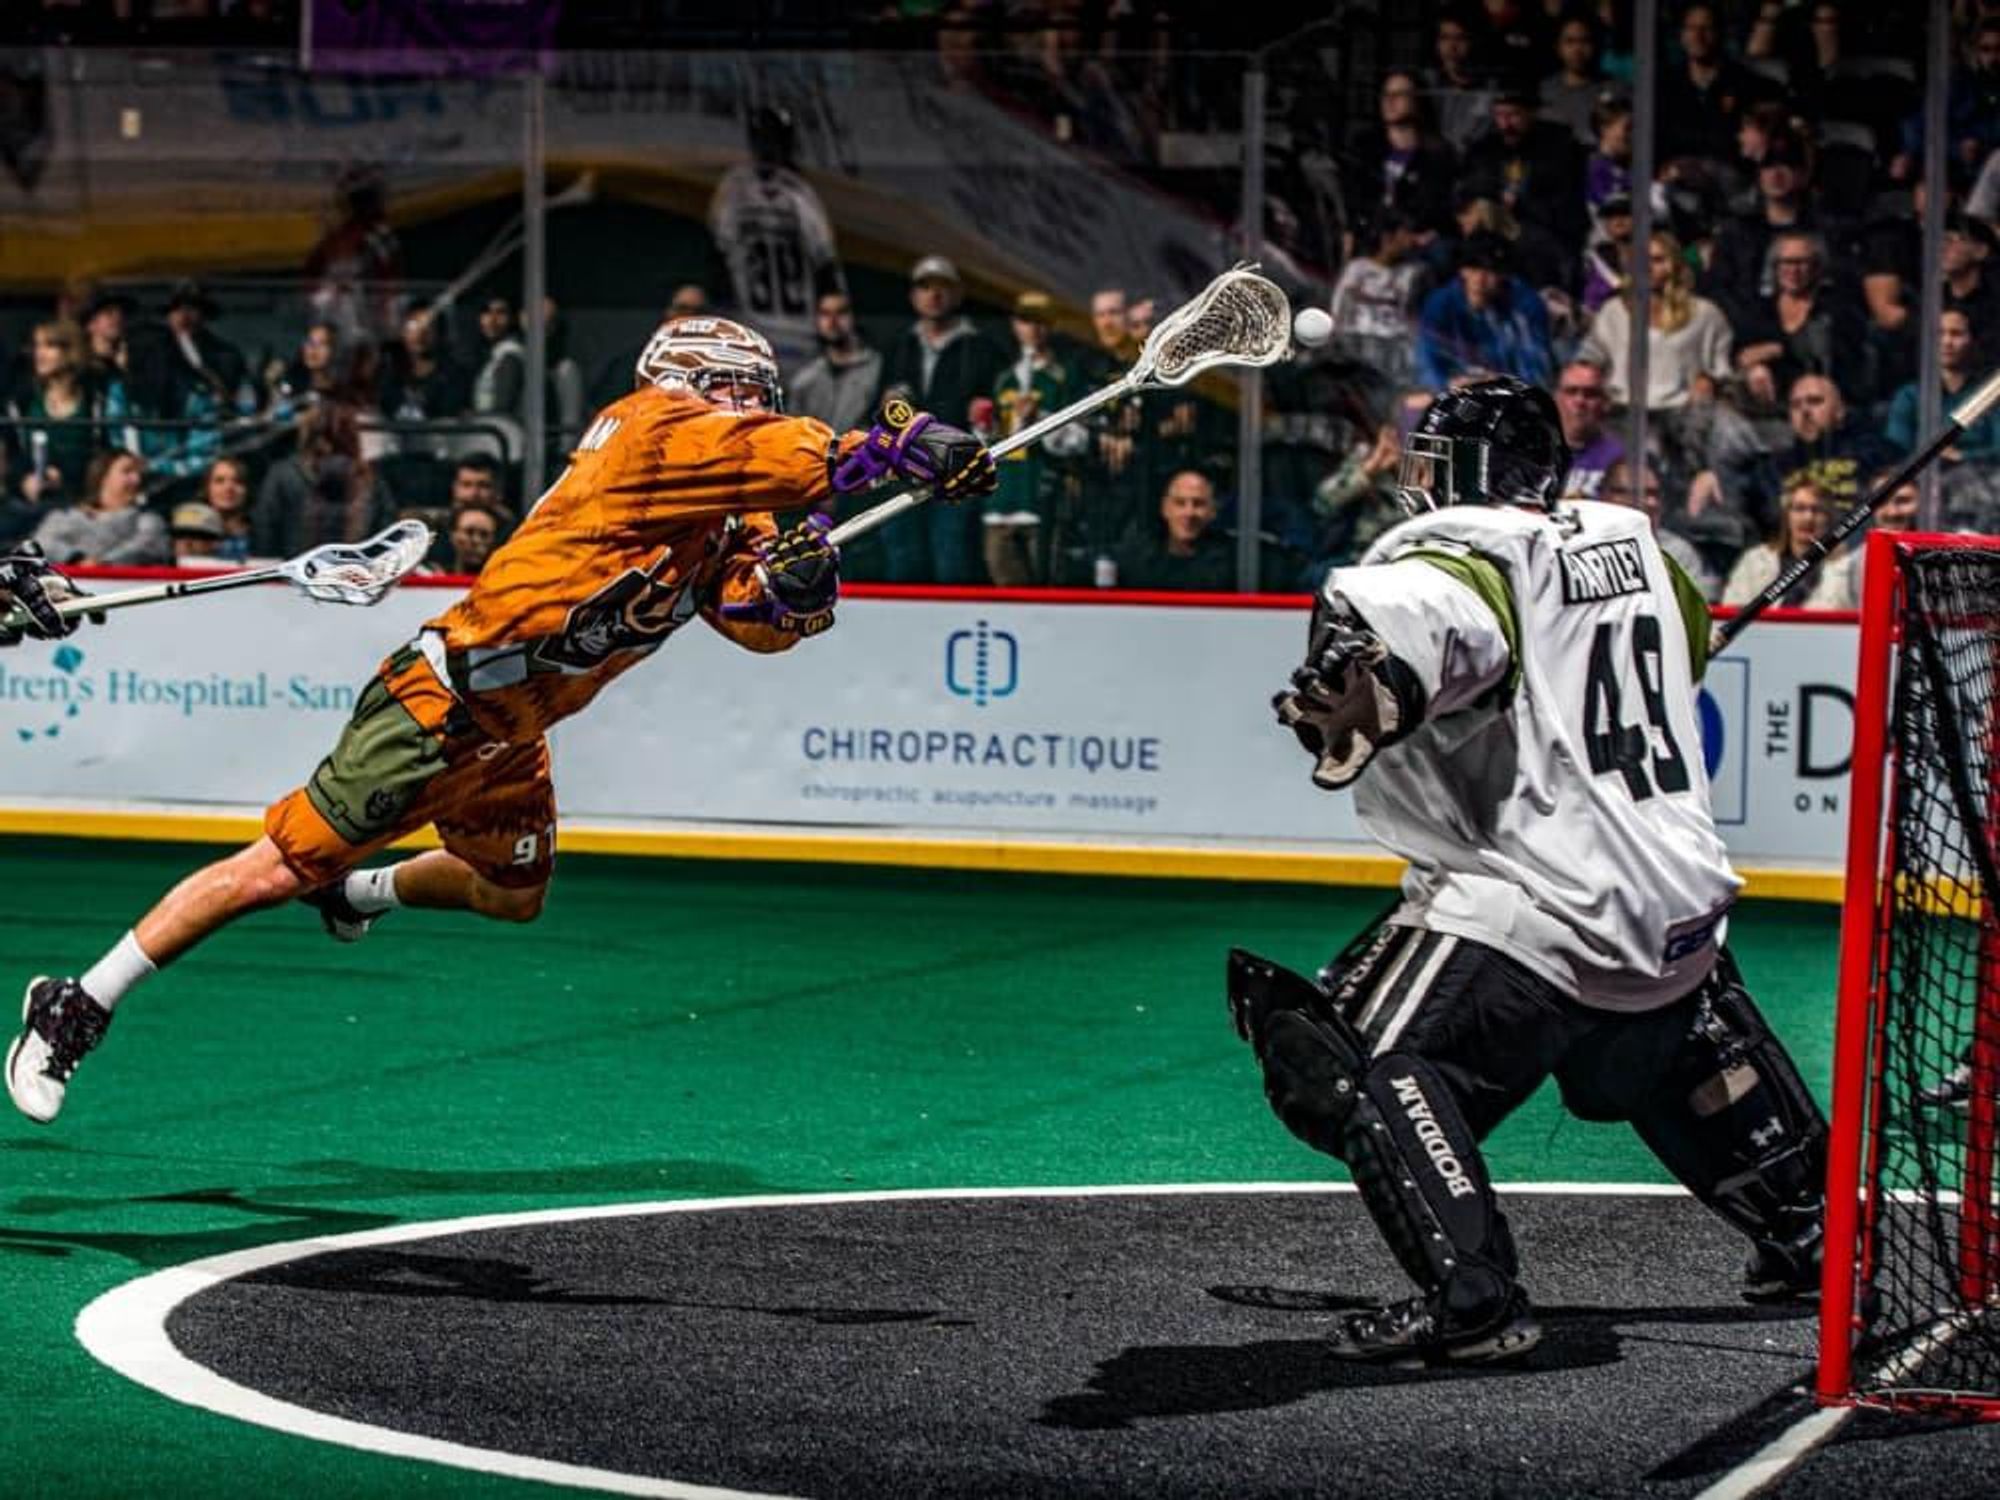 Fort Worth joins the big leagues with addition of new pro lacrosse